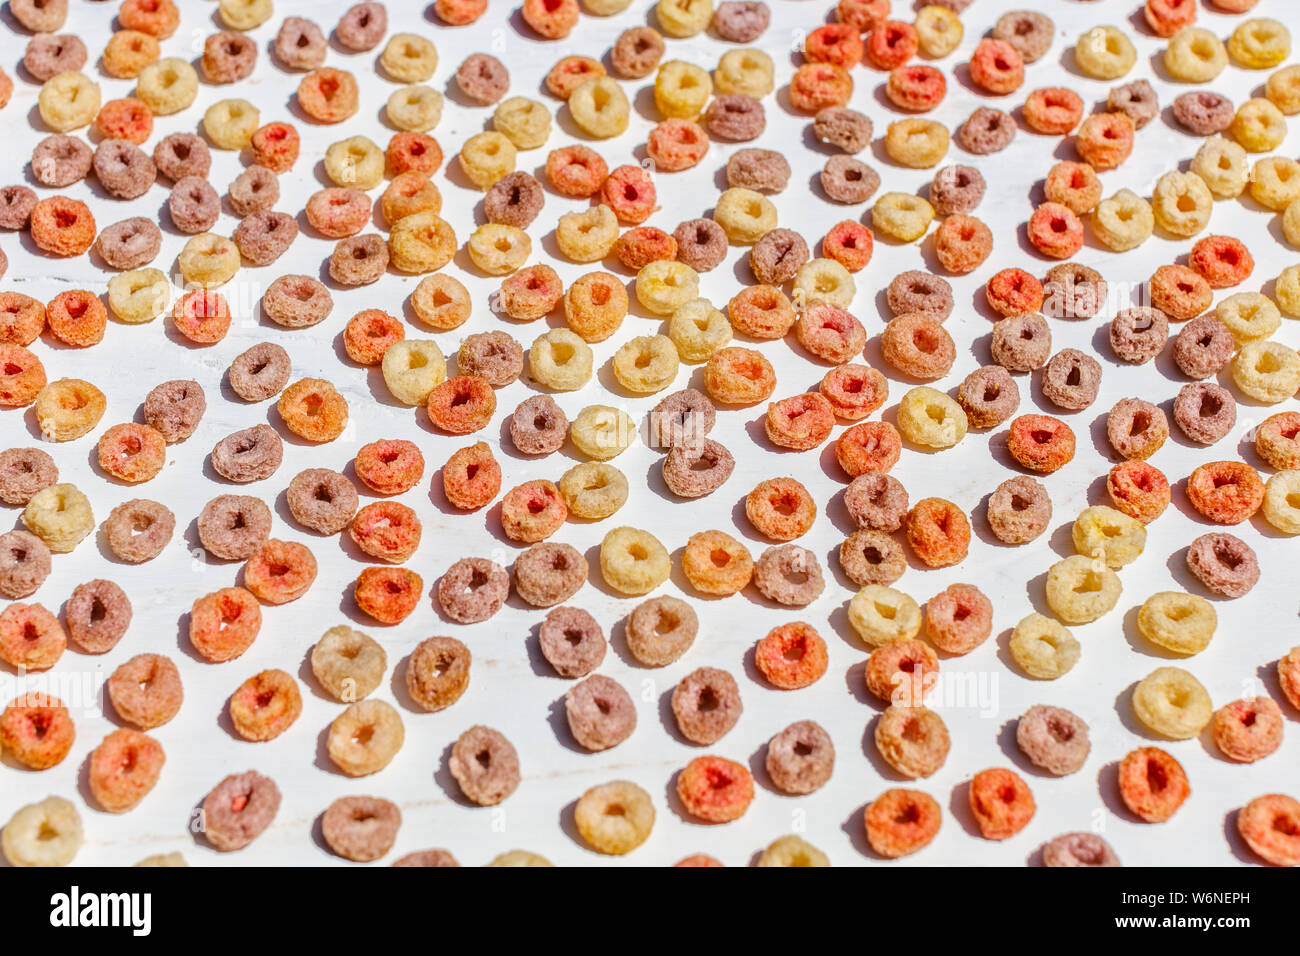 Colorful breakfast fruit loops on white background. Stock Photo